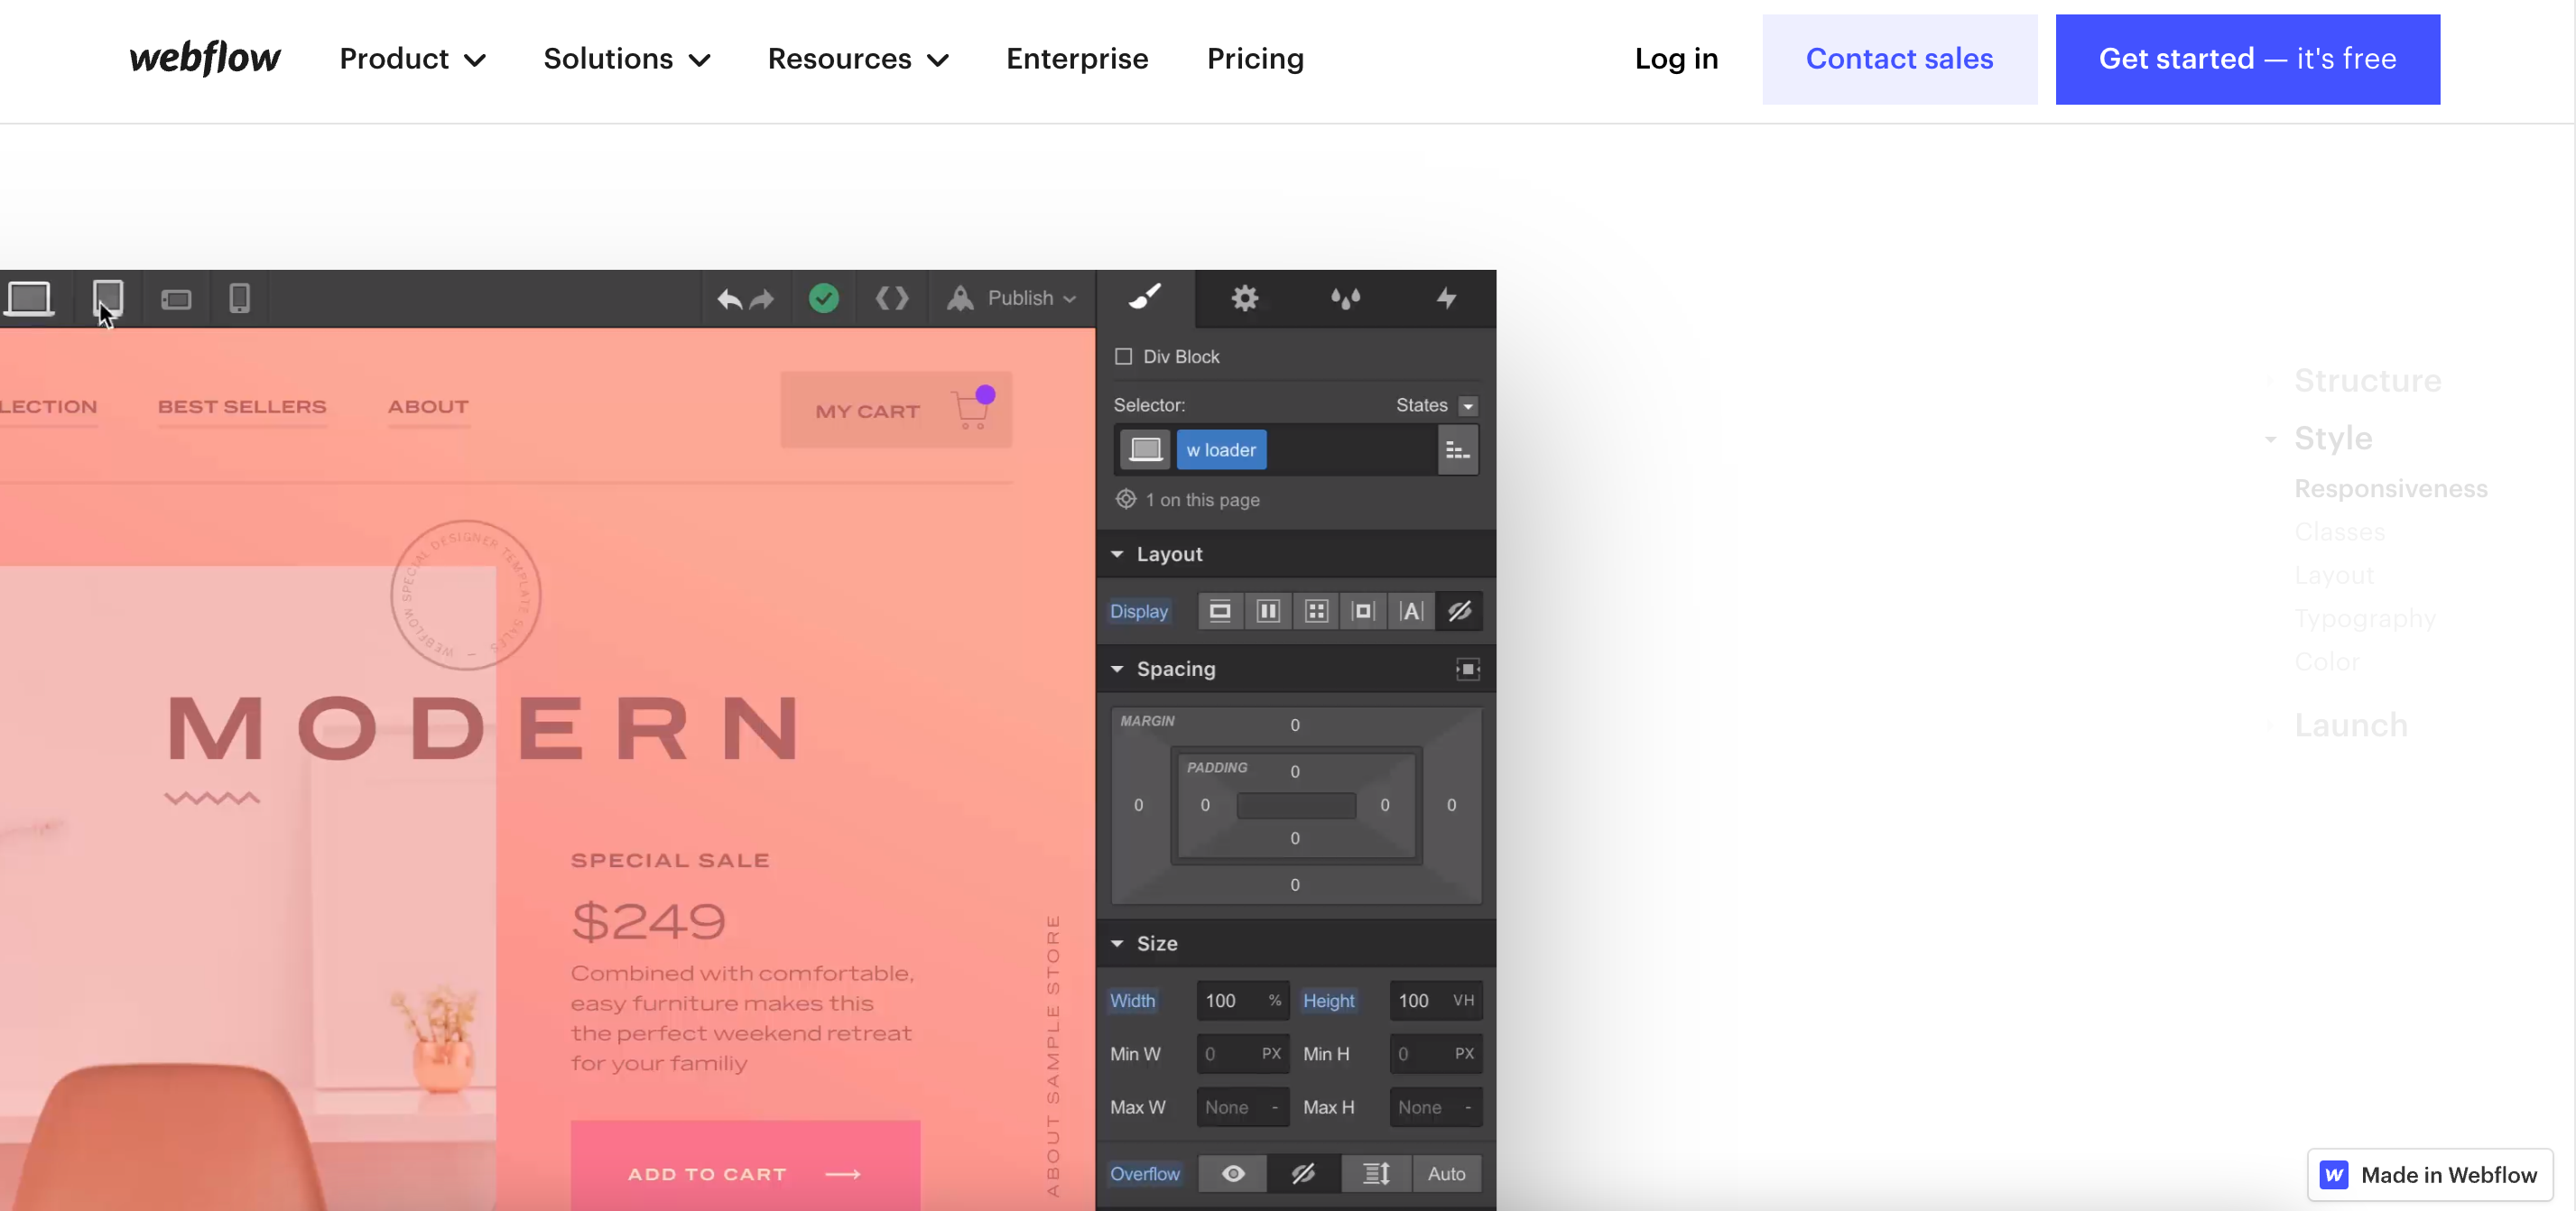 Webflow also comes with a visual builder so you can create your web design with a drag and drop editor.